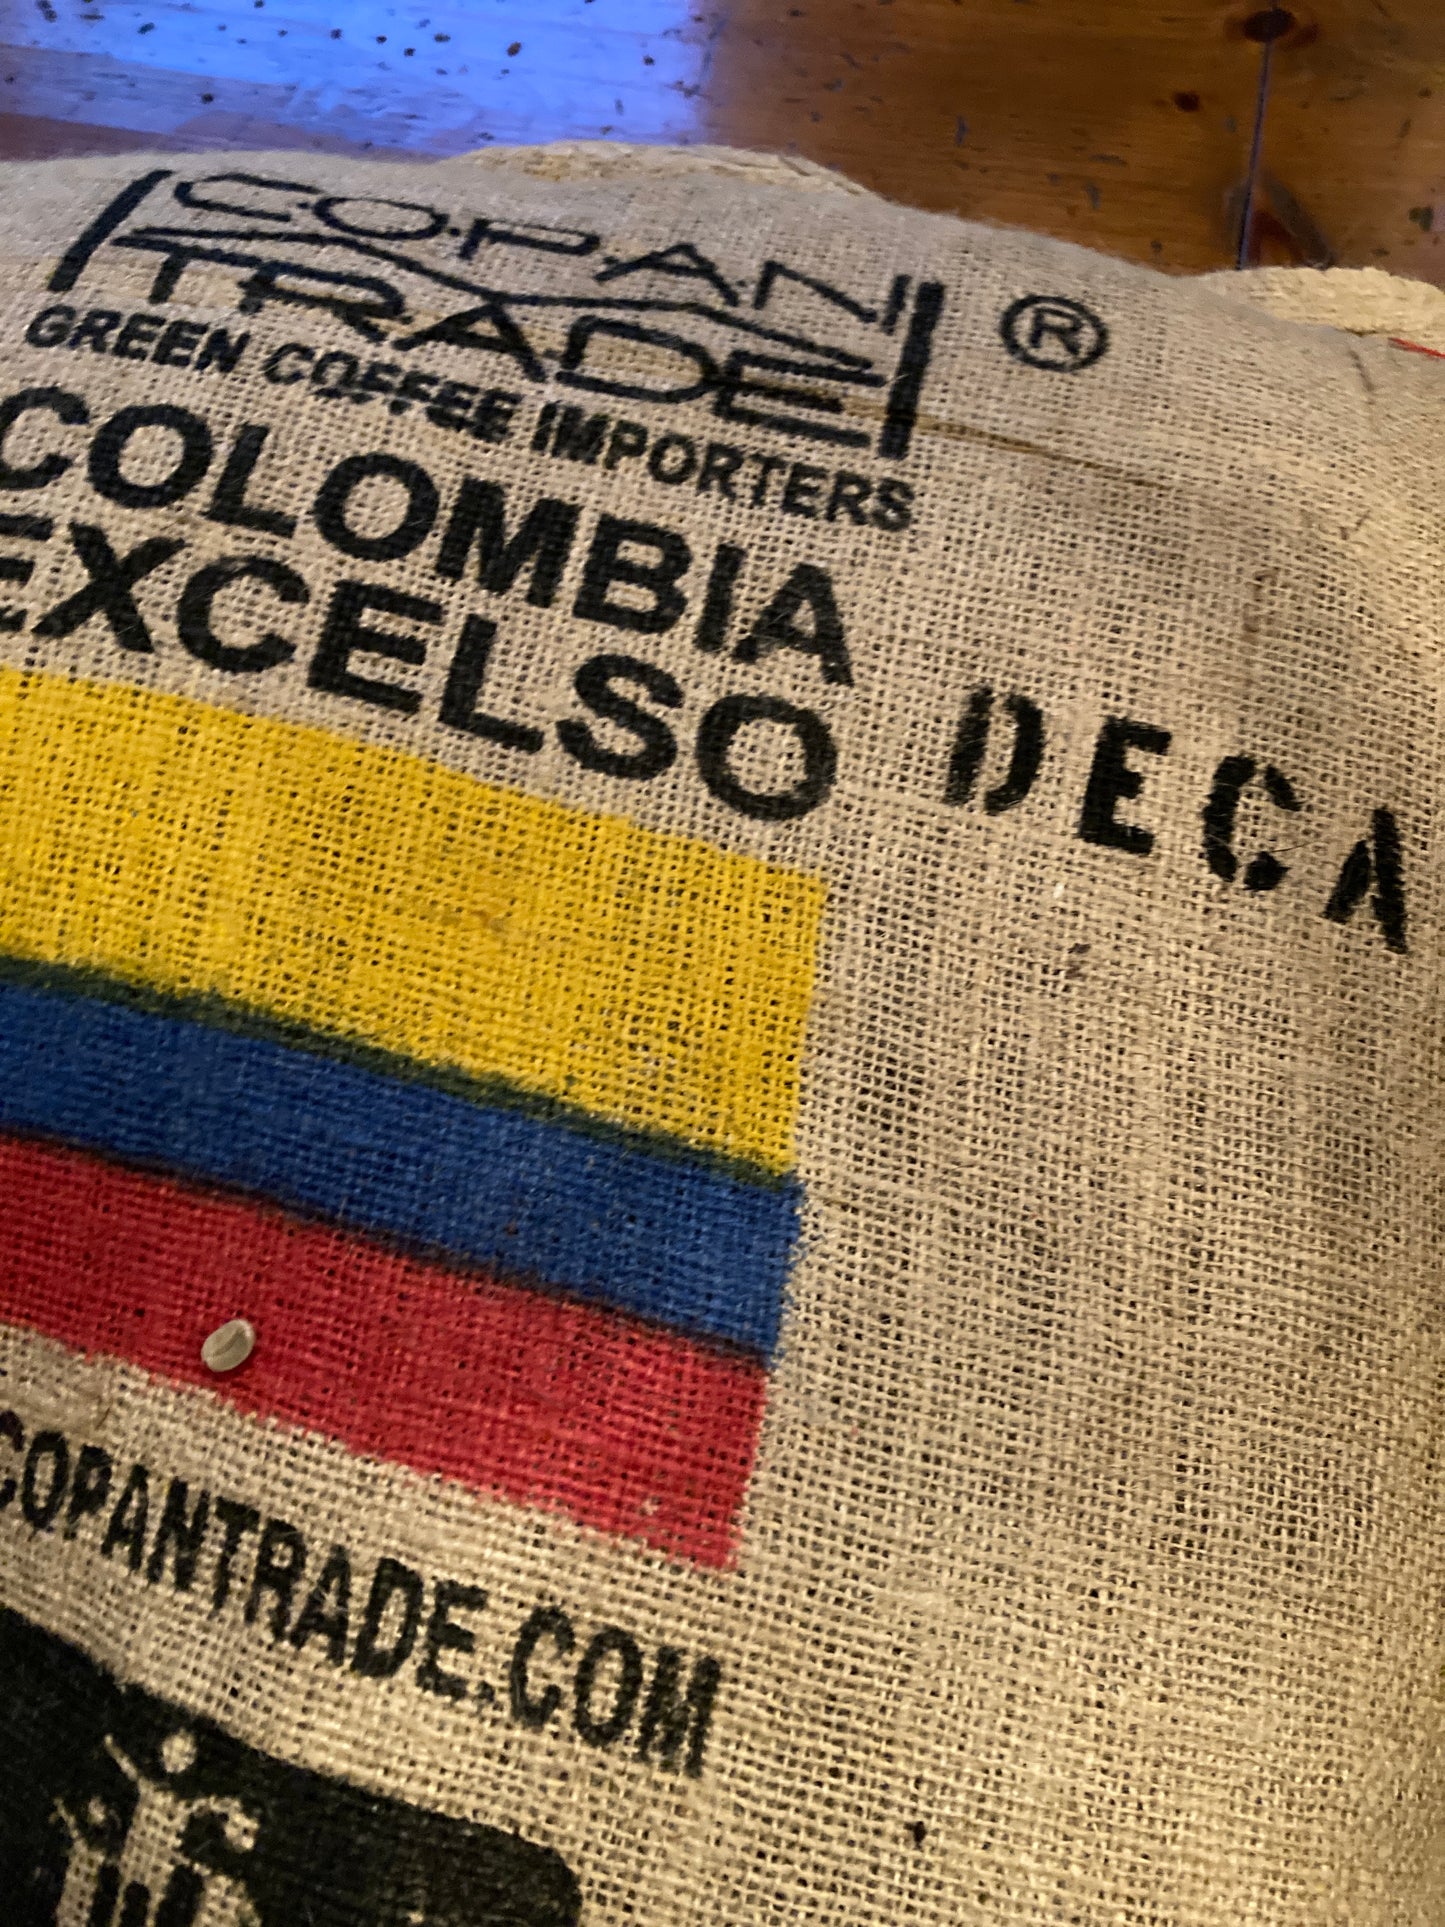 Colombian Excelso decaf